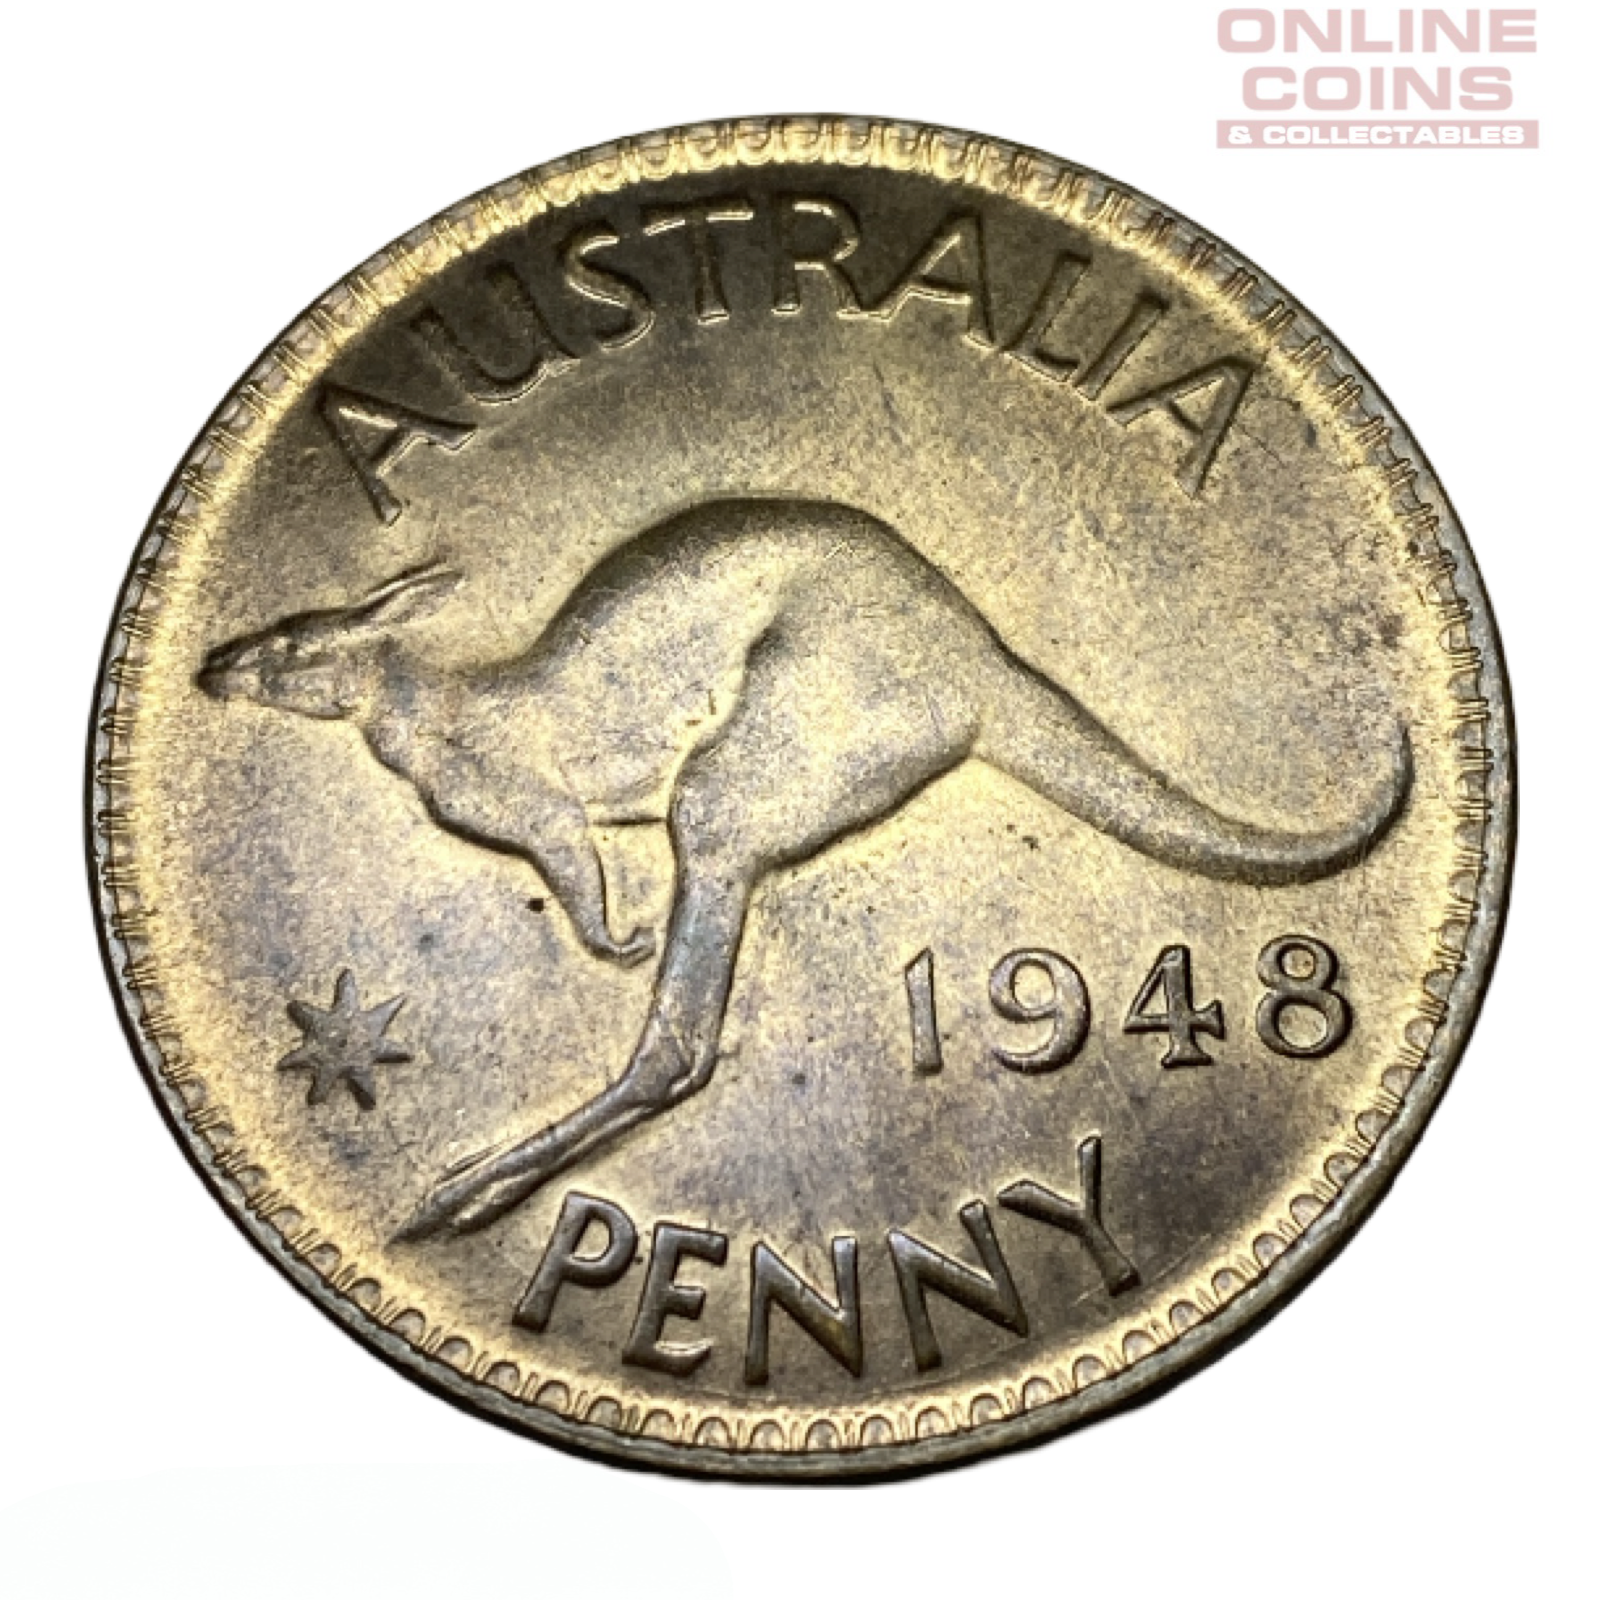 1948 Australian Penny - Almost Uncirculated